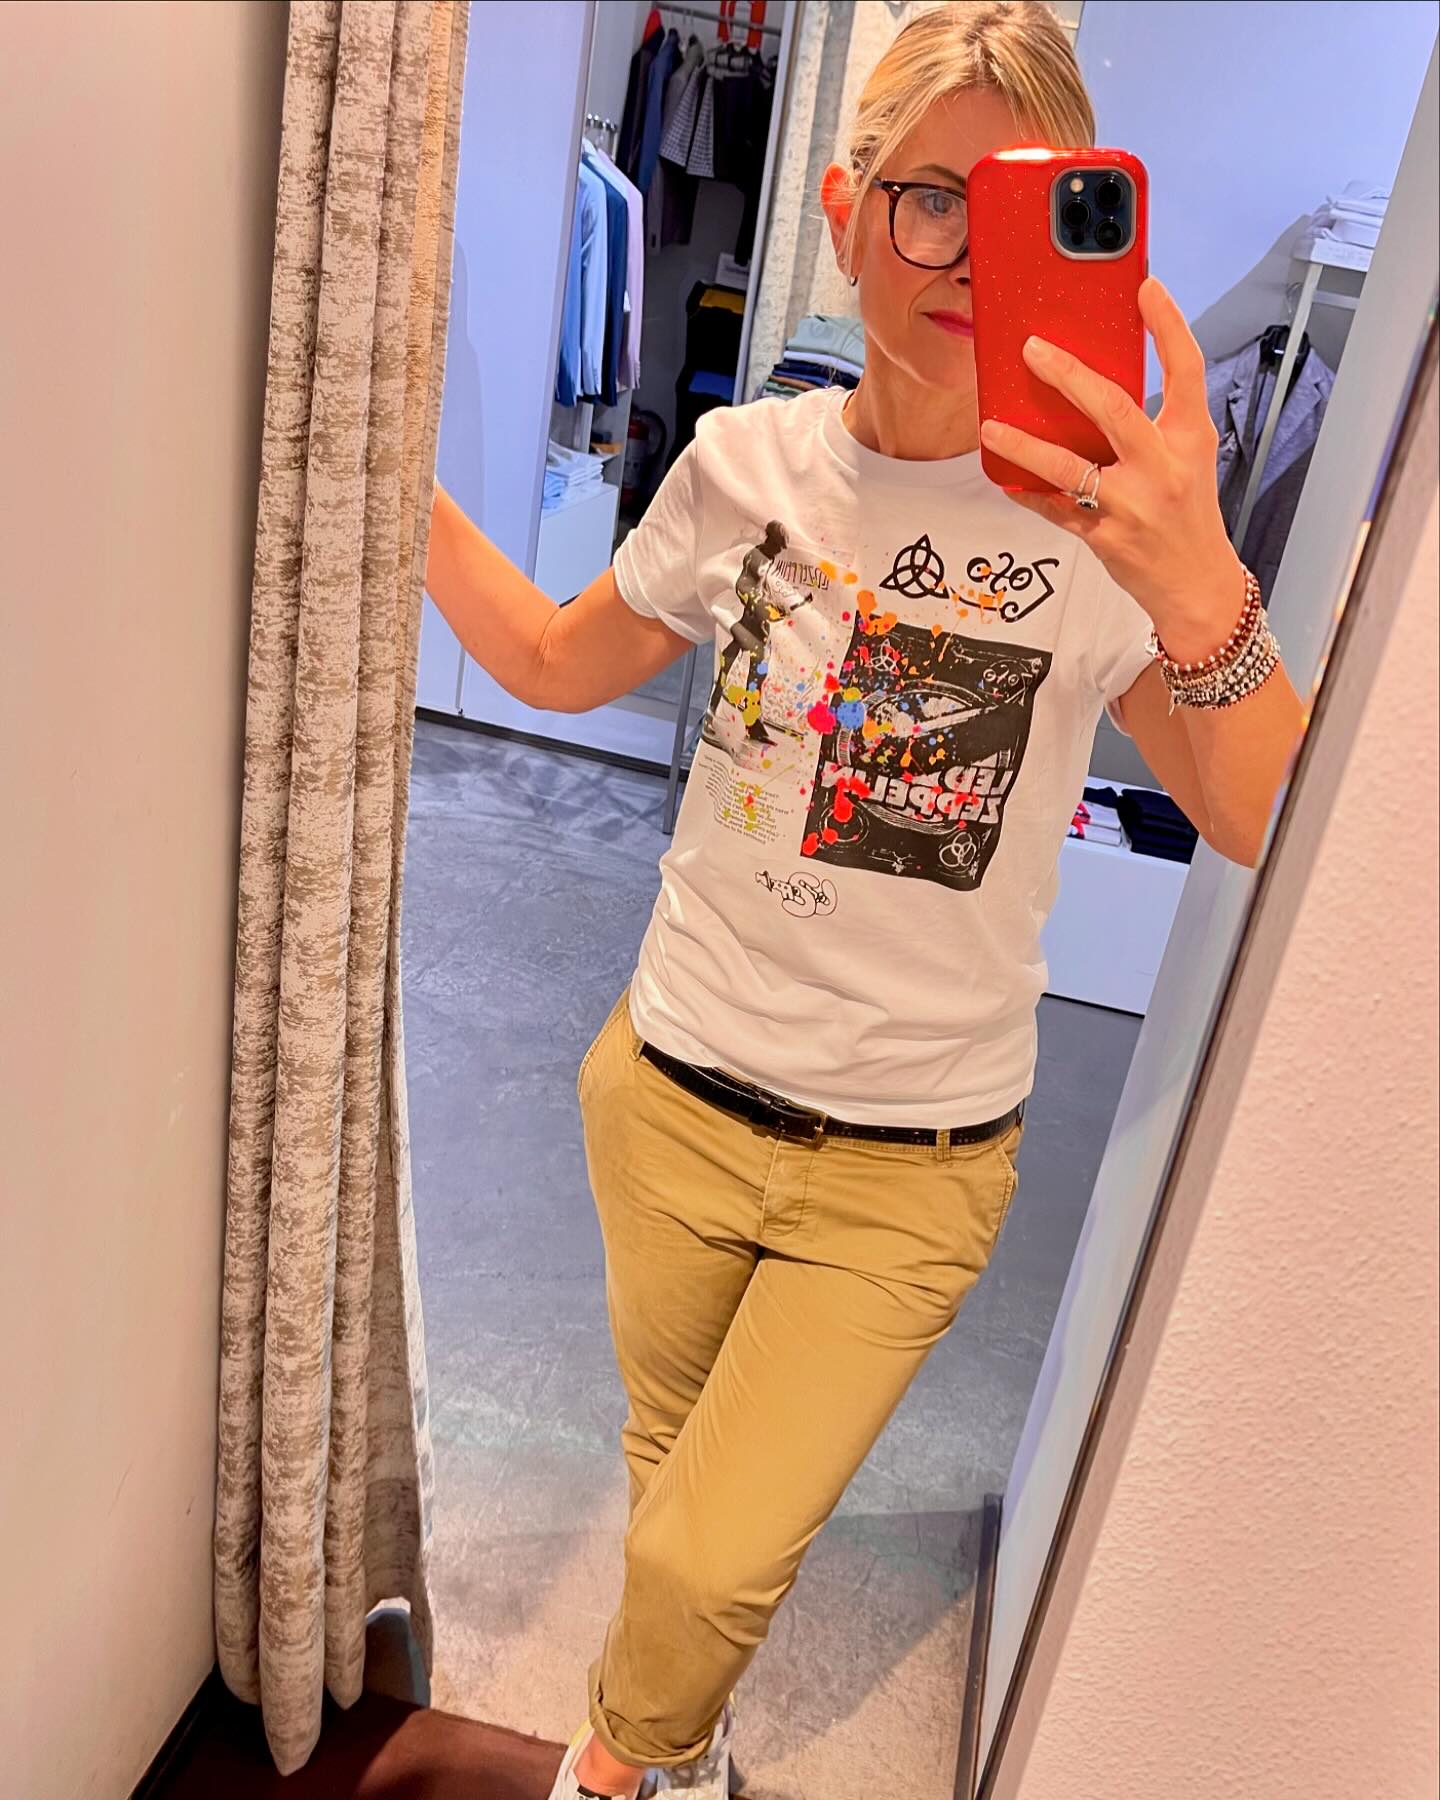 T-shirt unisex stampe nuove maaaaa BELLISSIME anche da donna 🤩🤩